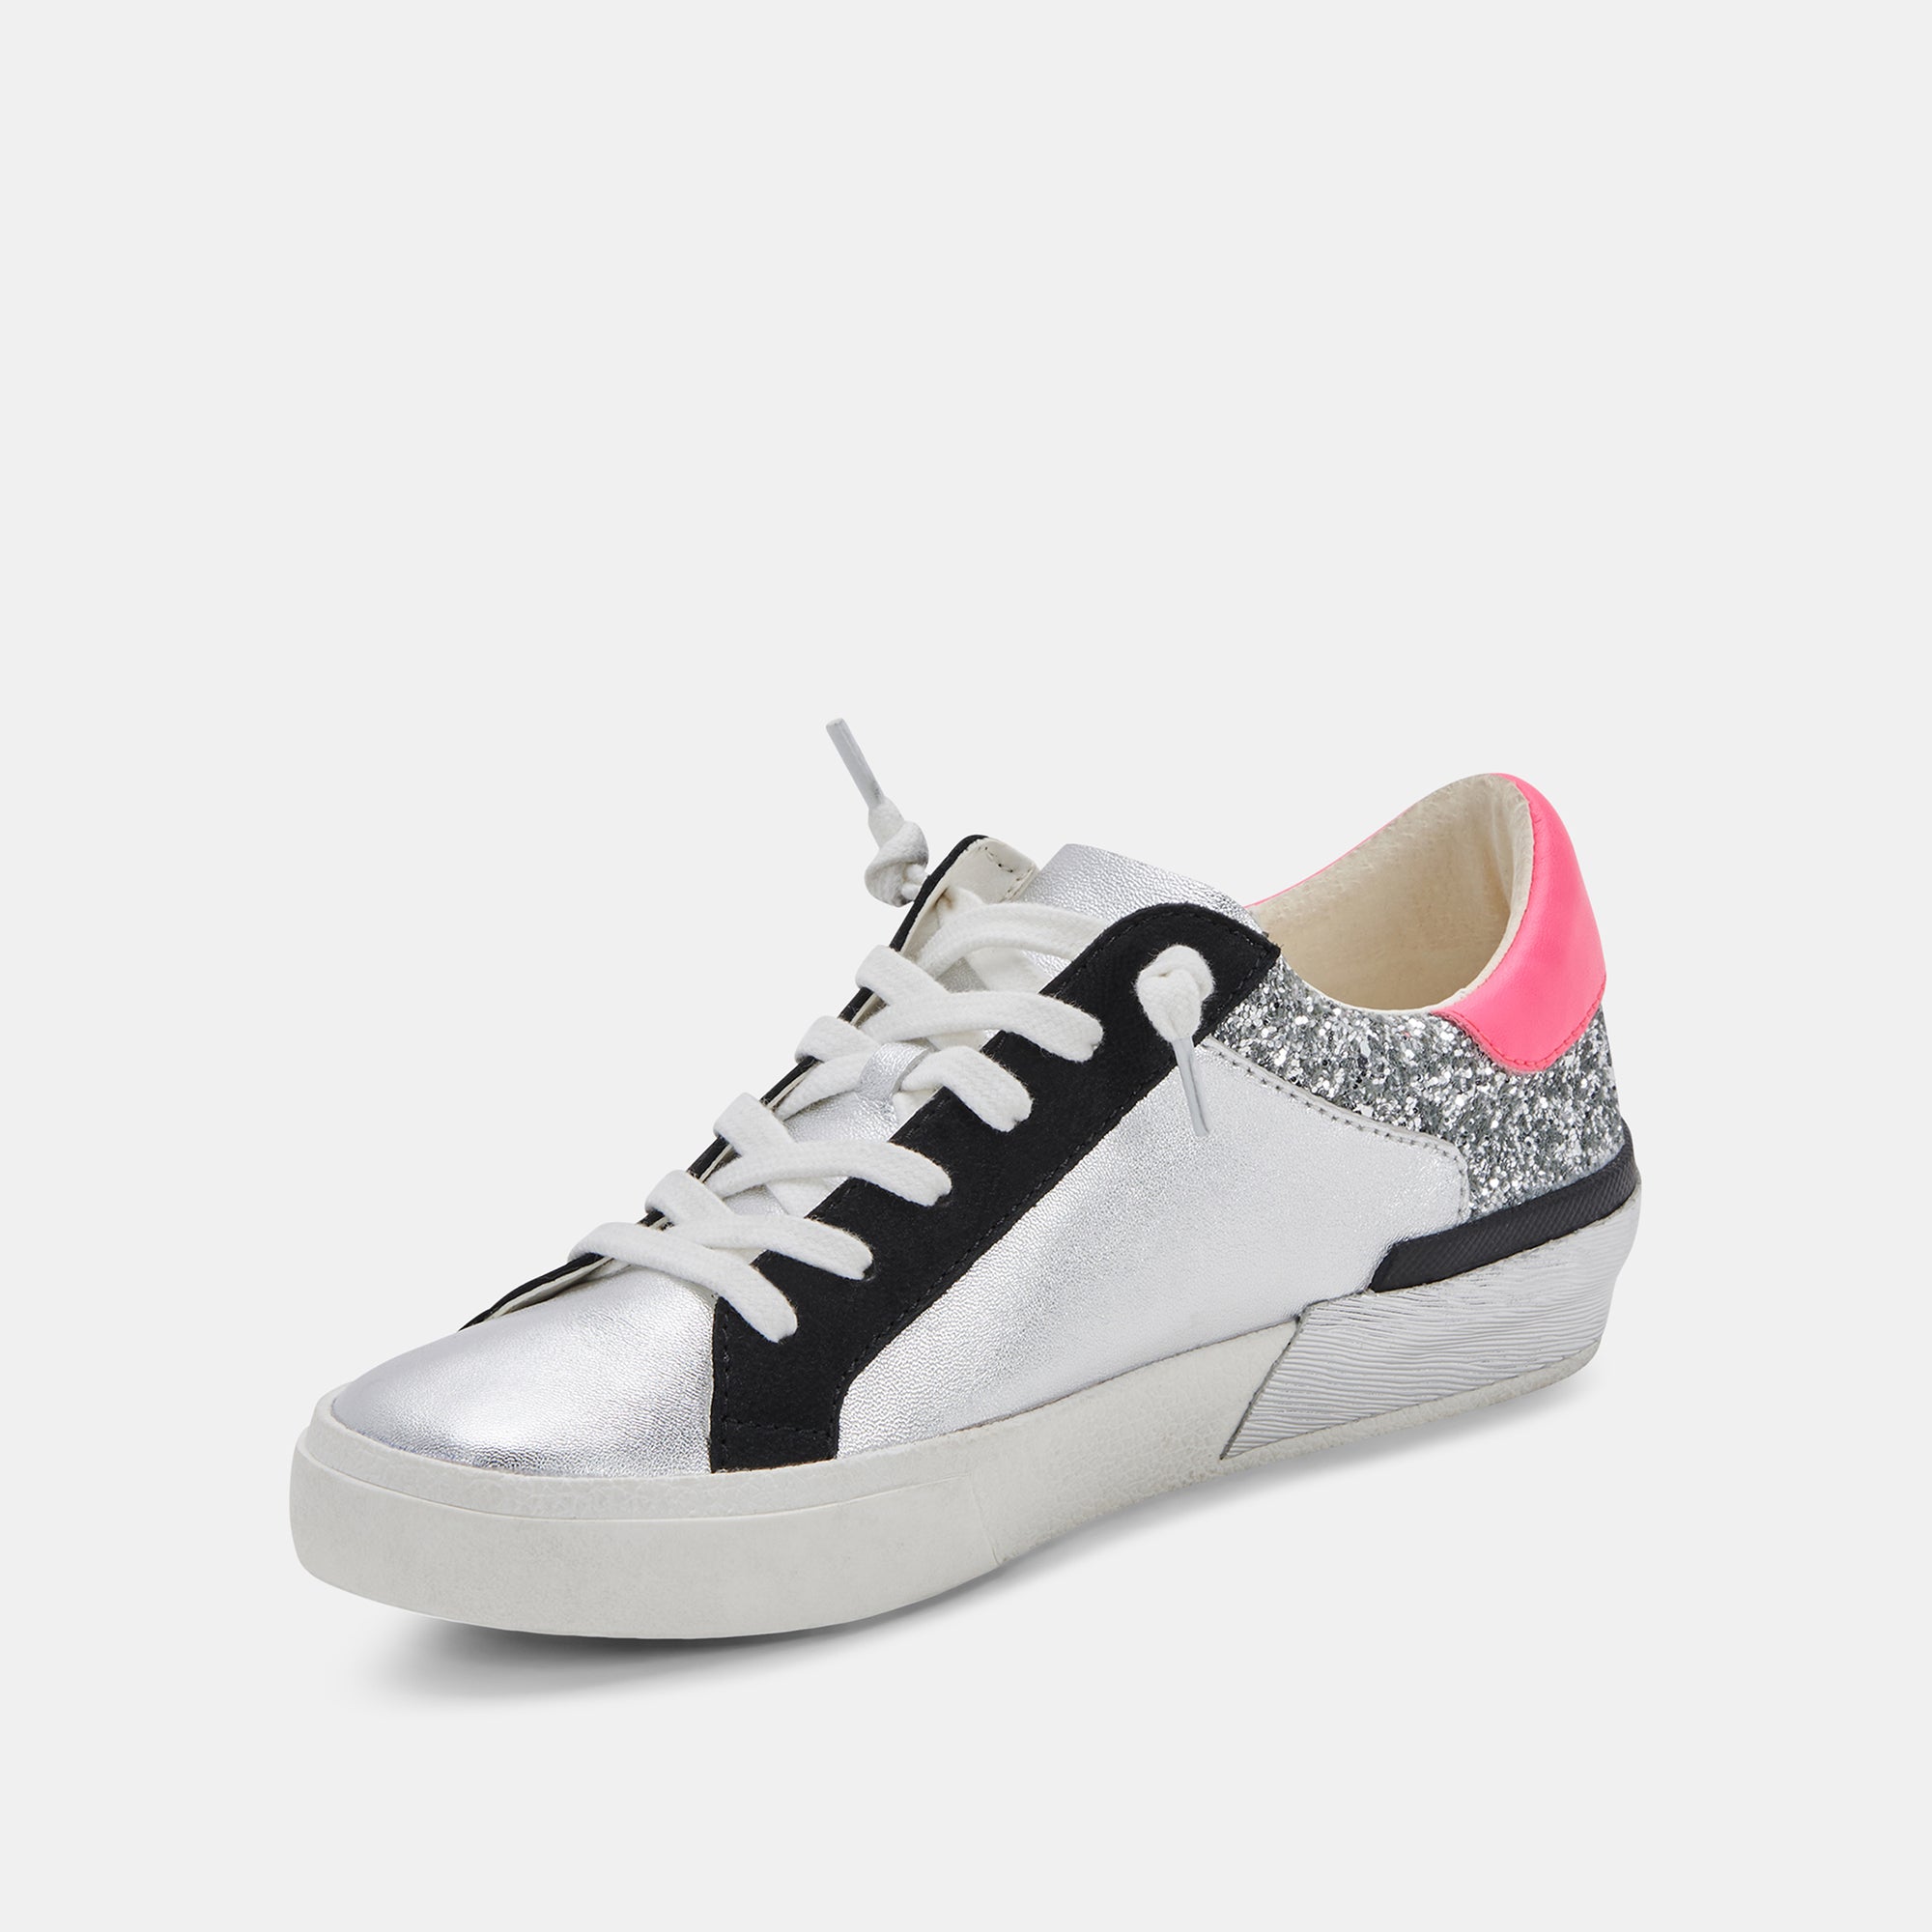 ZINA SNEAKERS DK SILVER LEATHER – Dolce